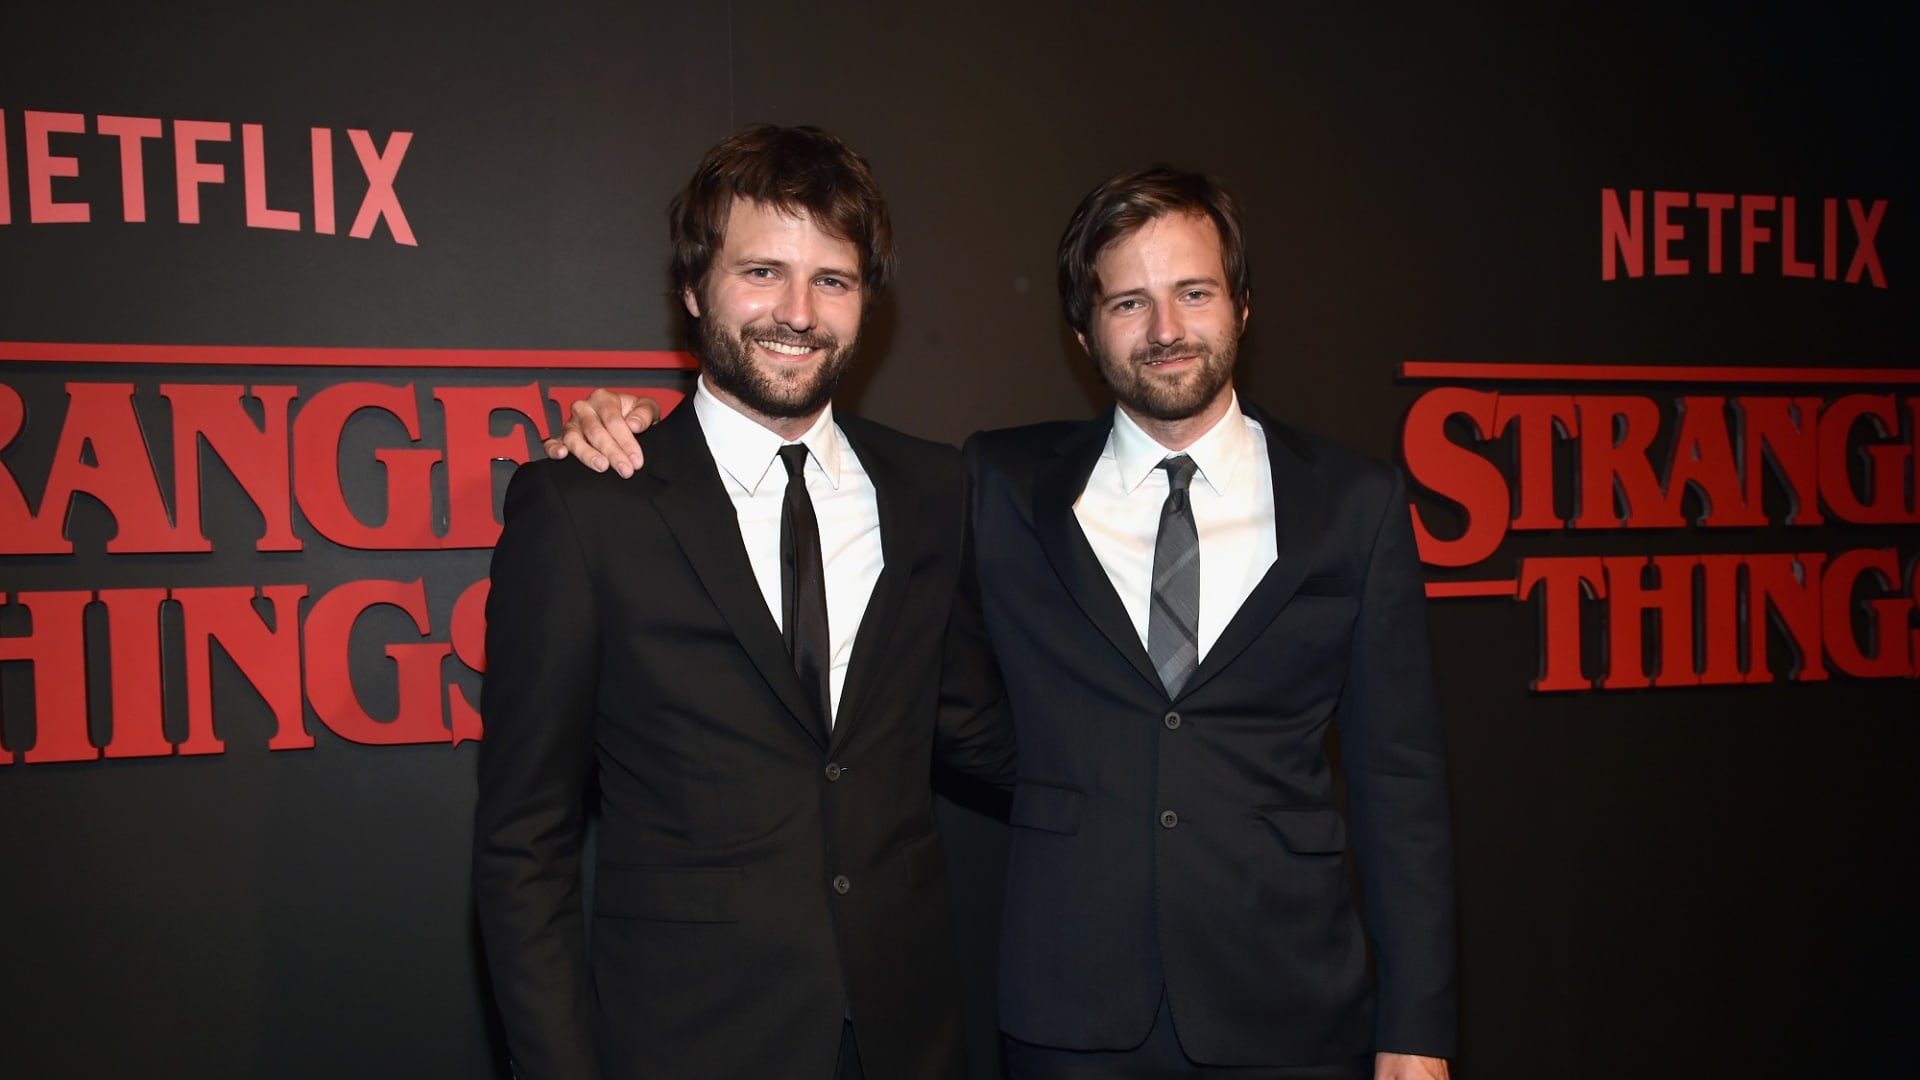 How to Contact the Duffer Brothers